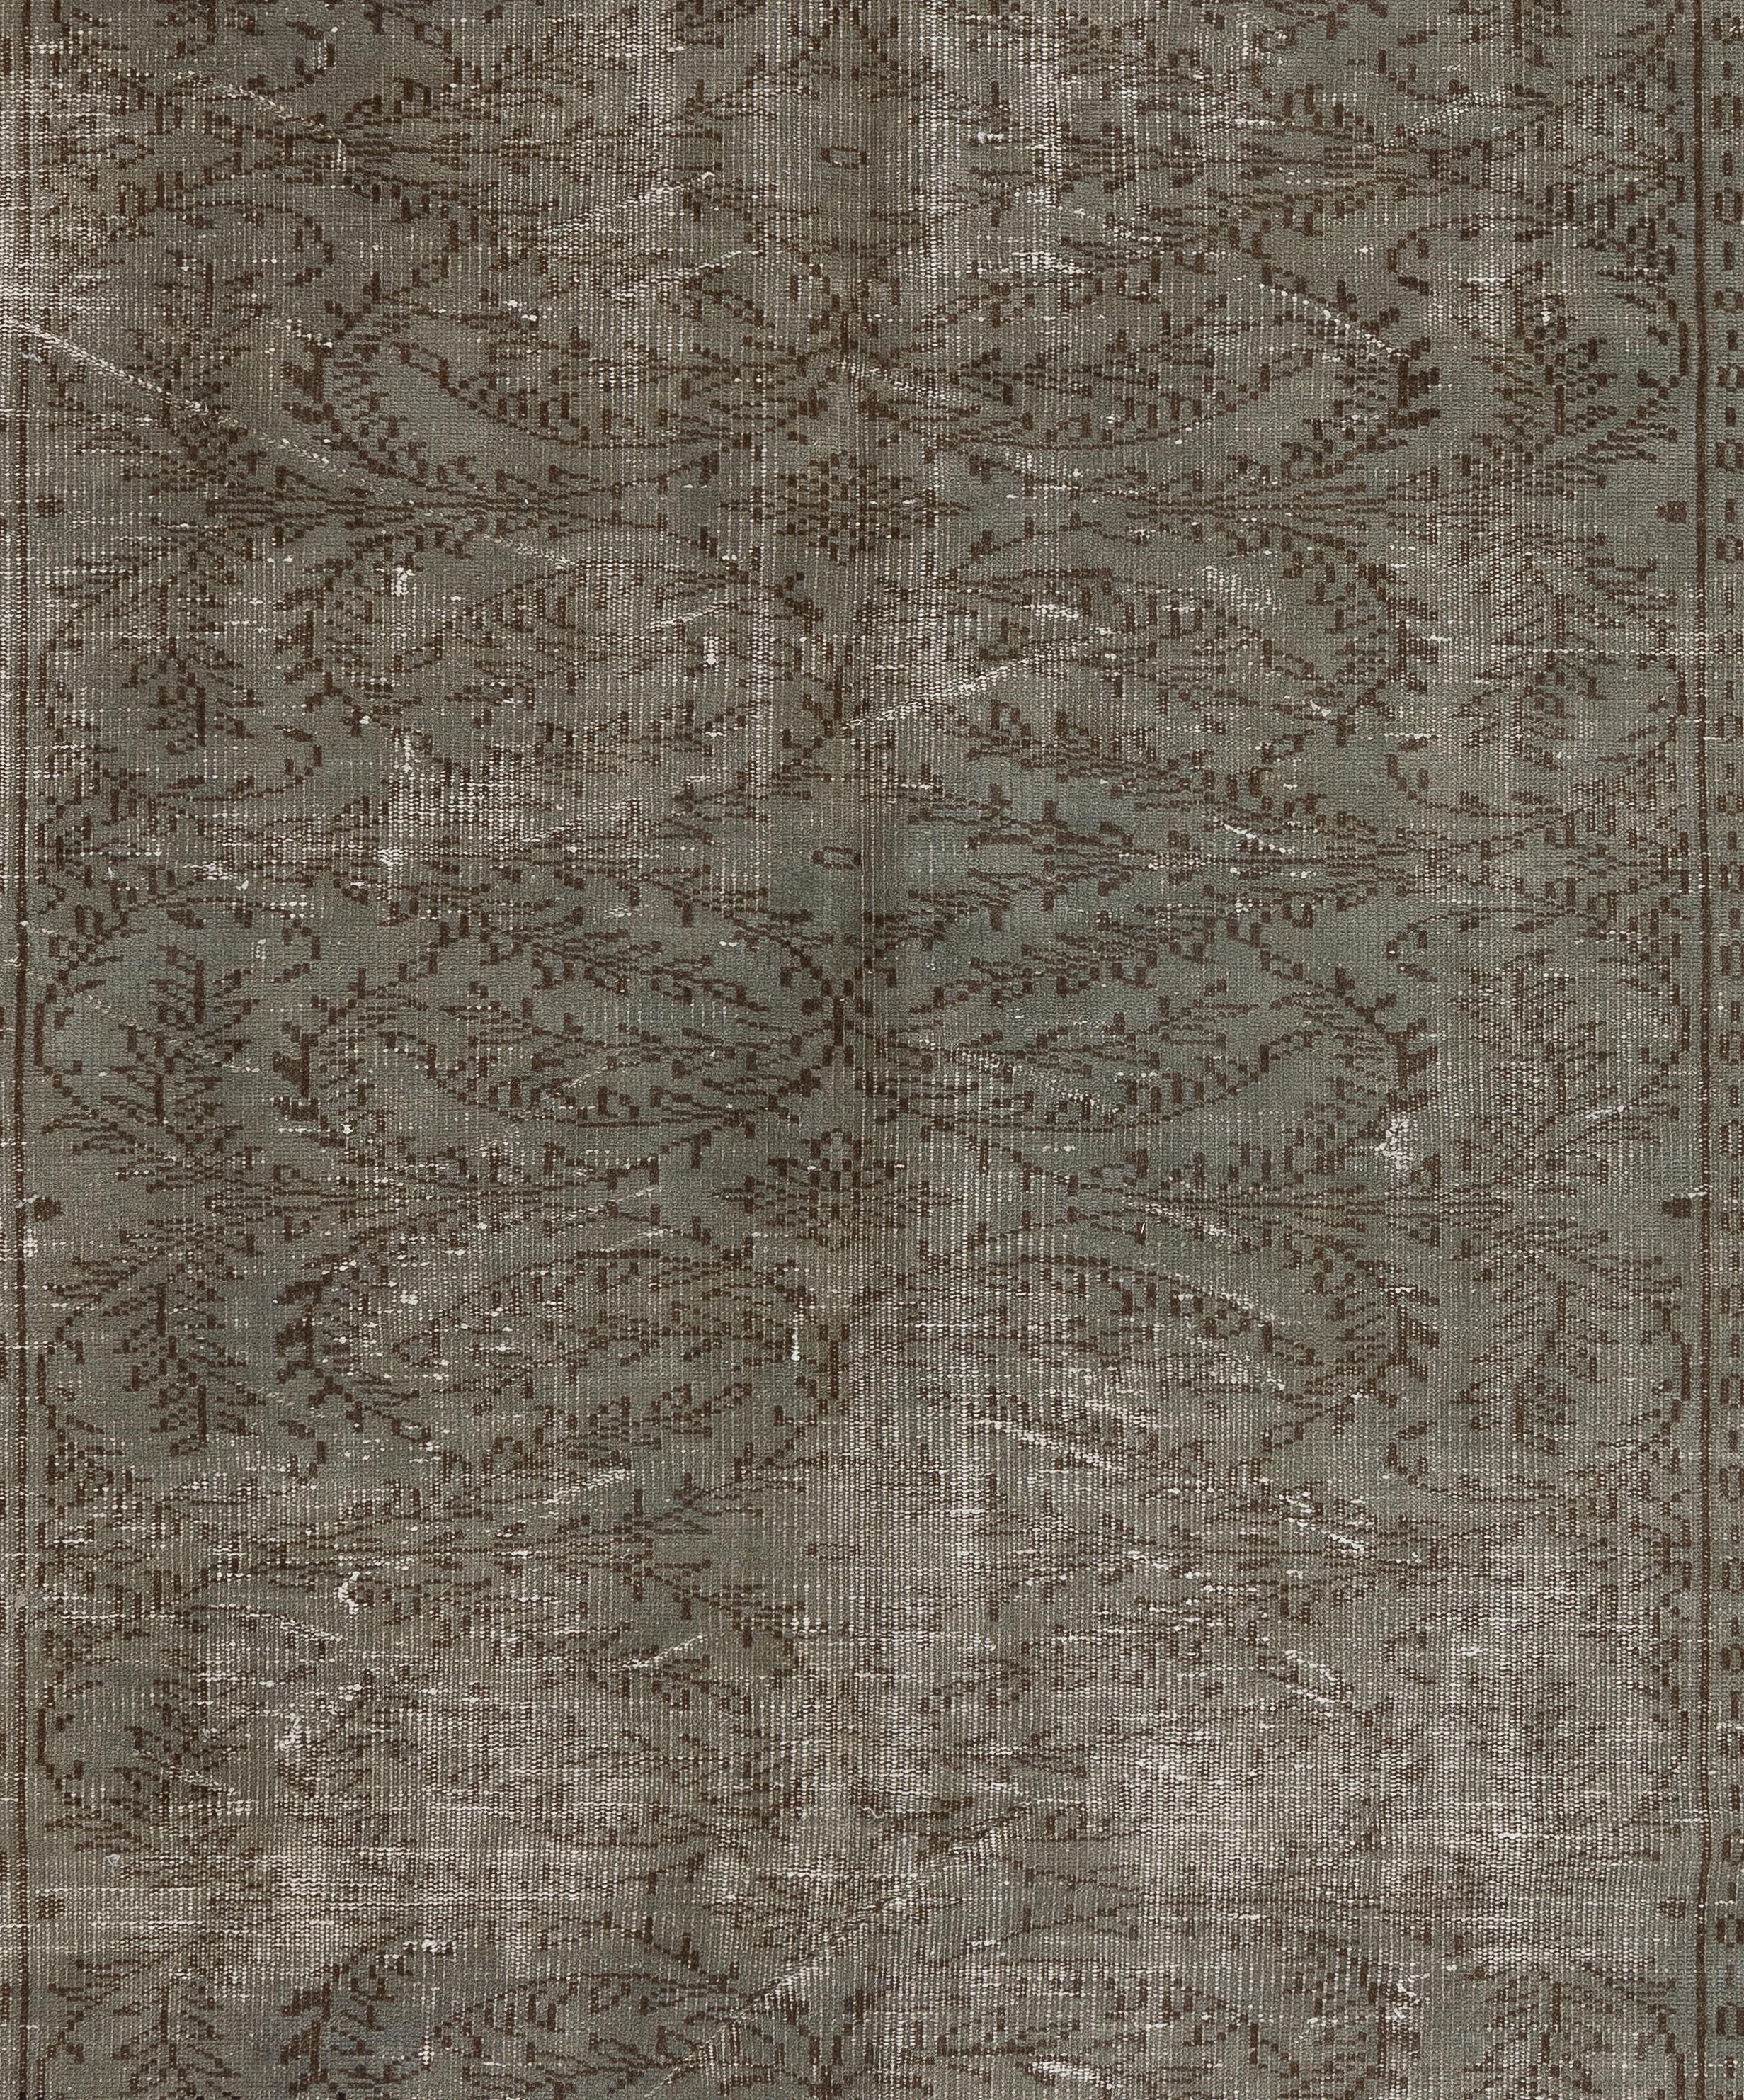 Midcentury Handmade Turkish Wool Area Rug in Gray for Modern Interiors In Good Condition For Sale In Philadelphia, PA